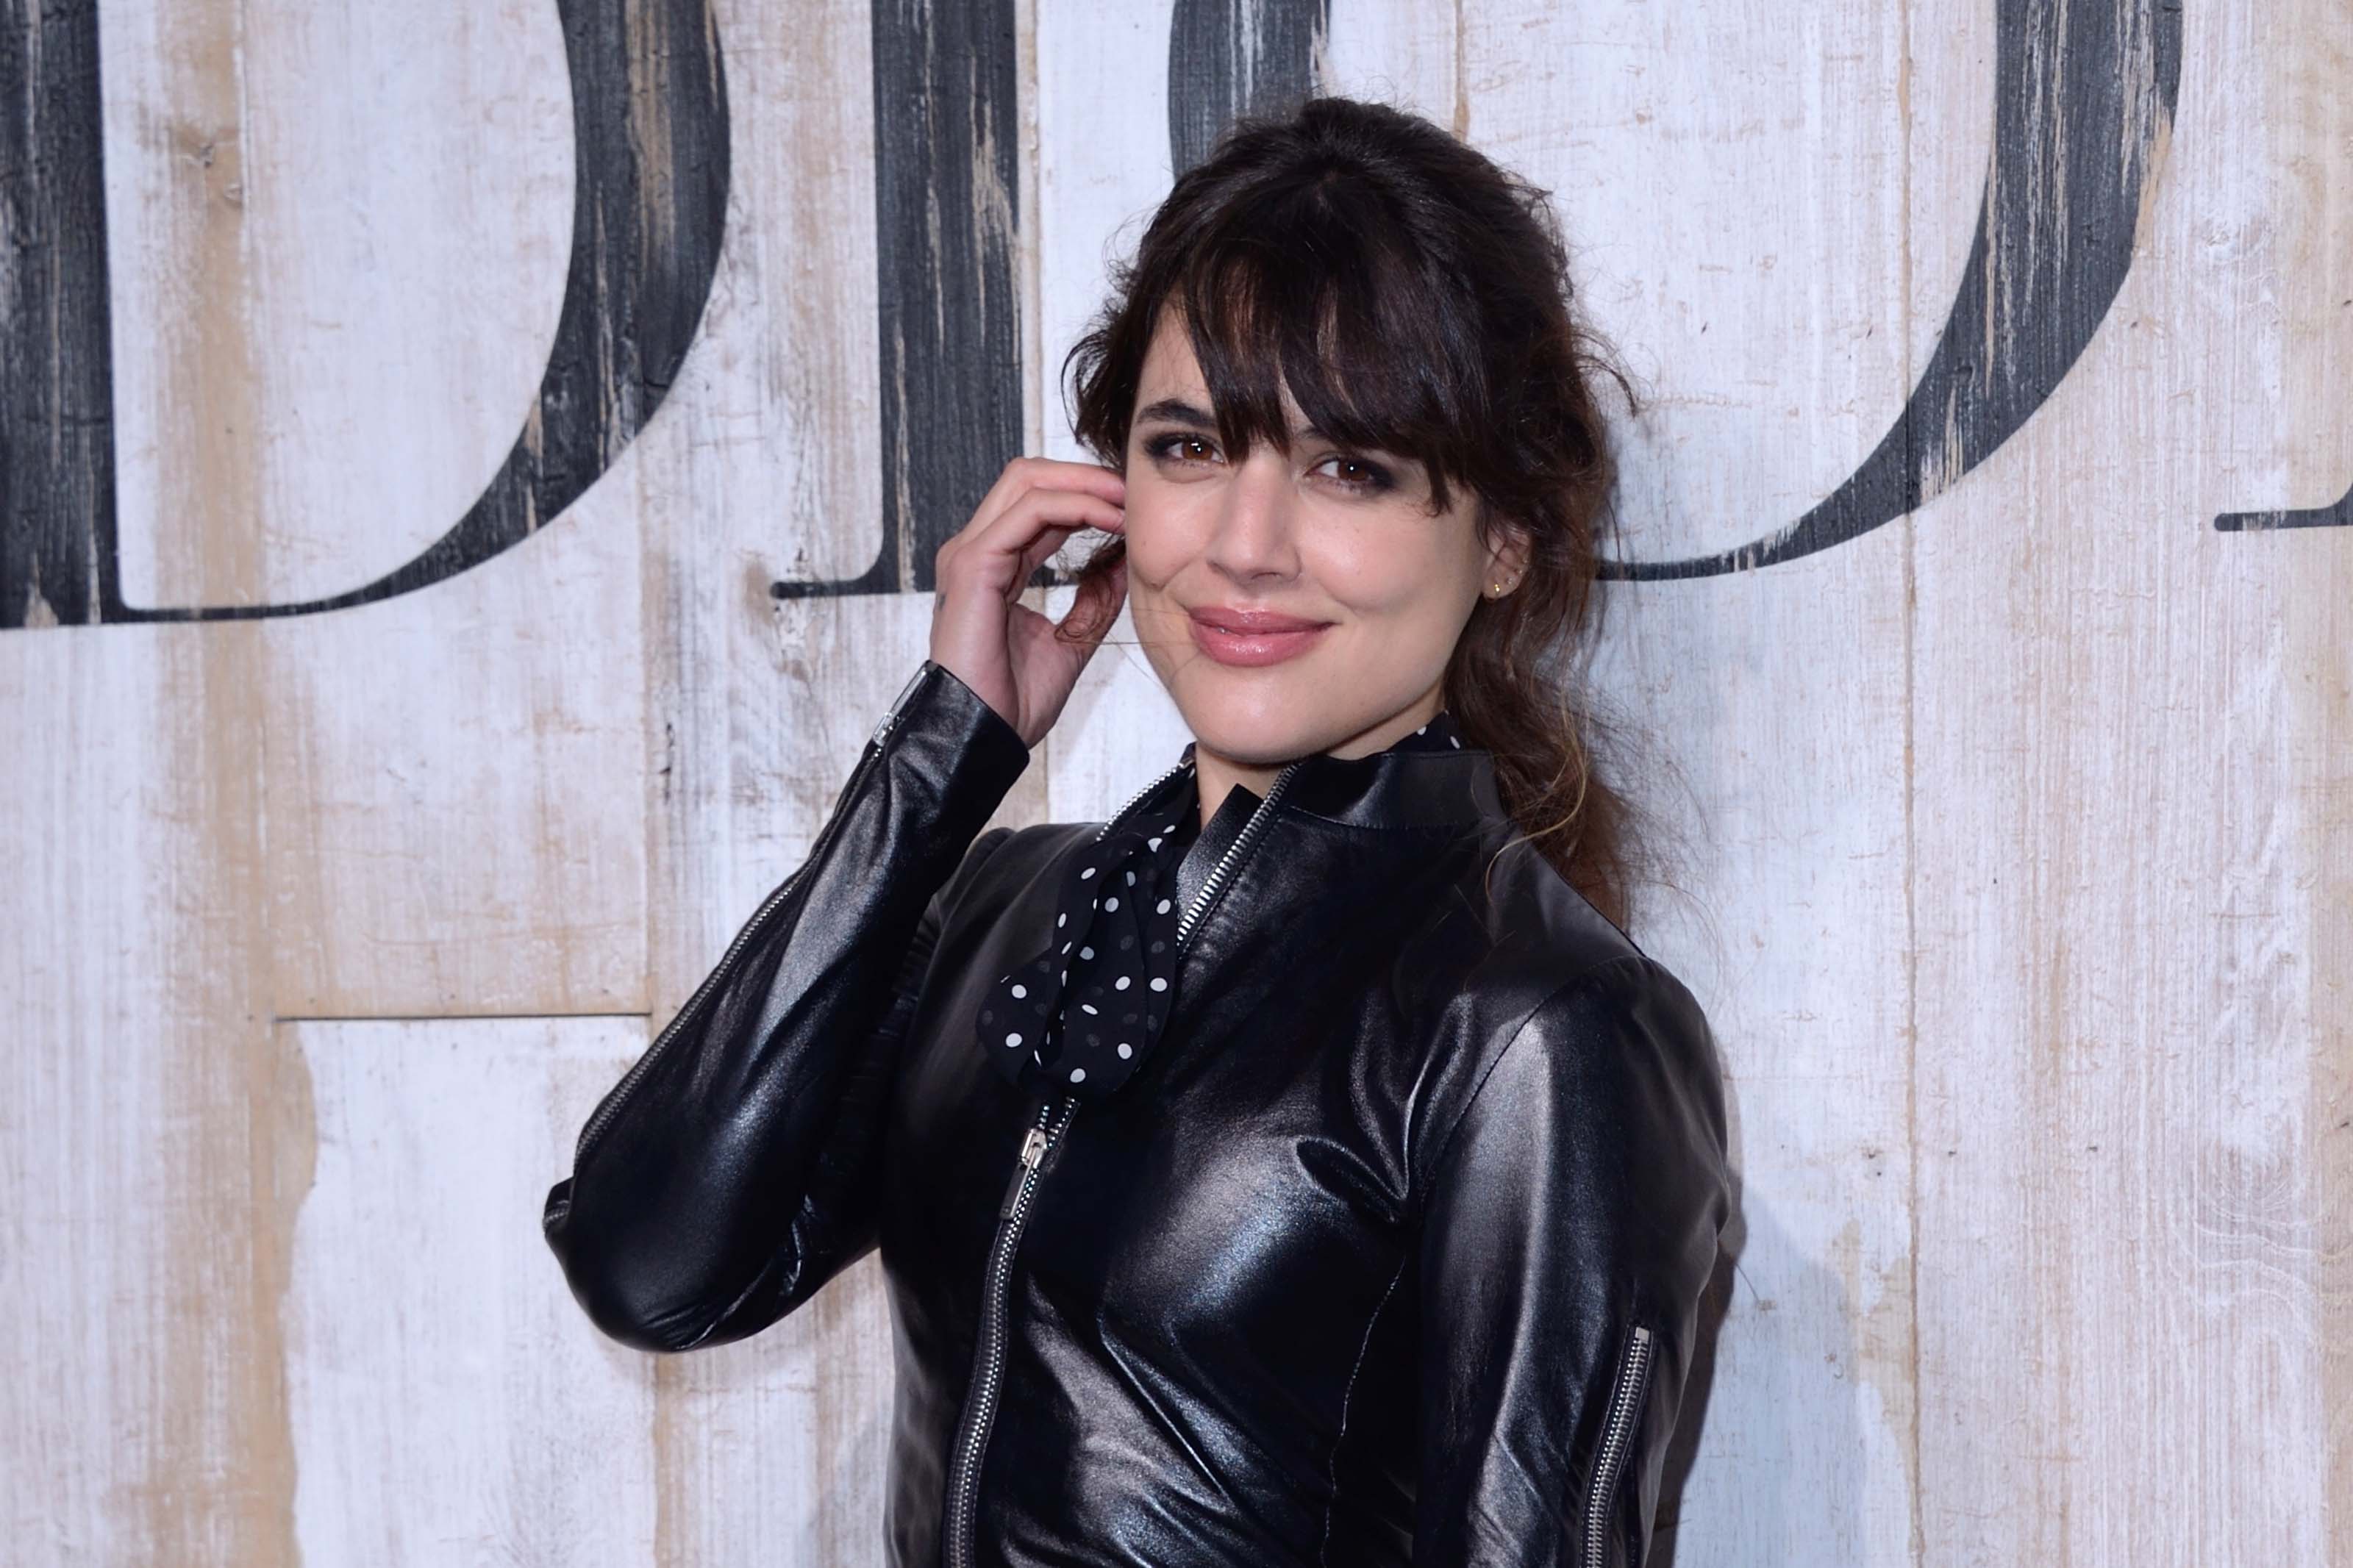 Adriana Ugarte attends Photocall Christian Dior Couture Cruise Collection